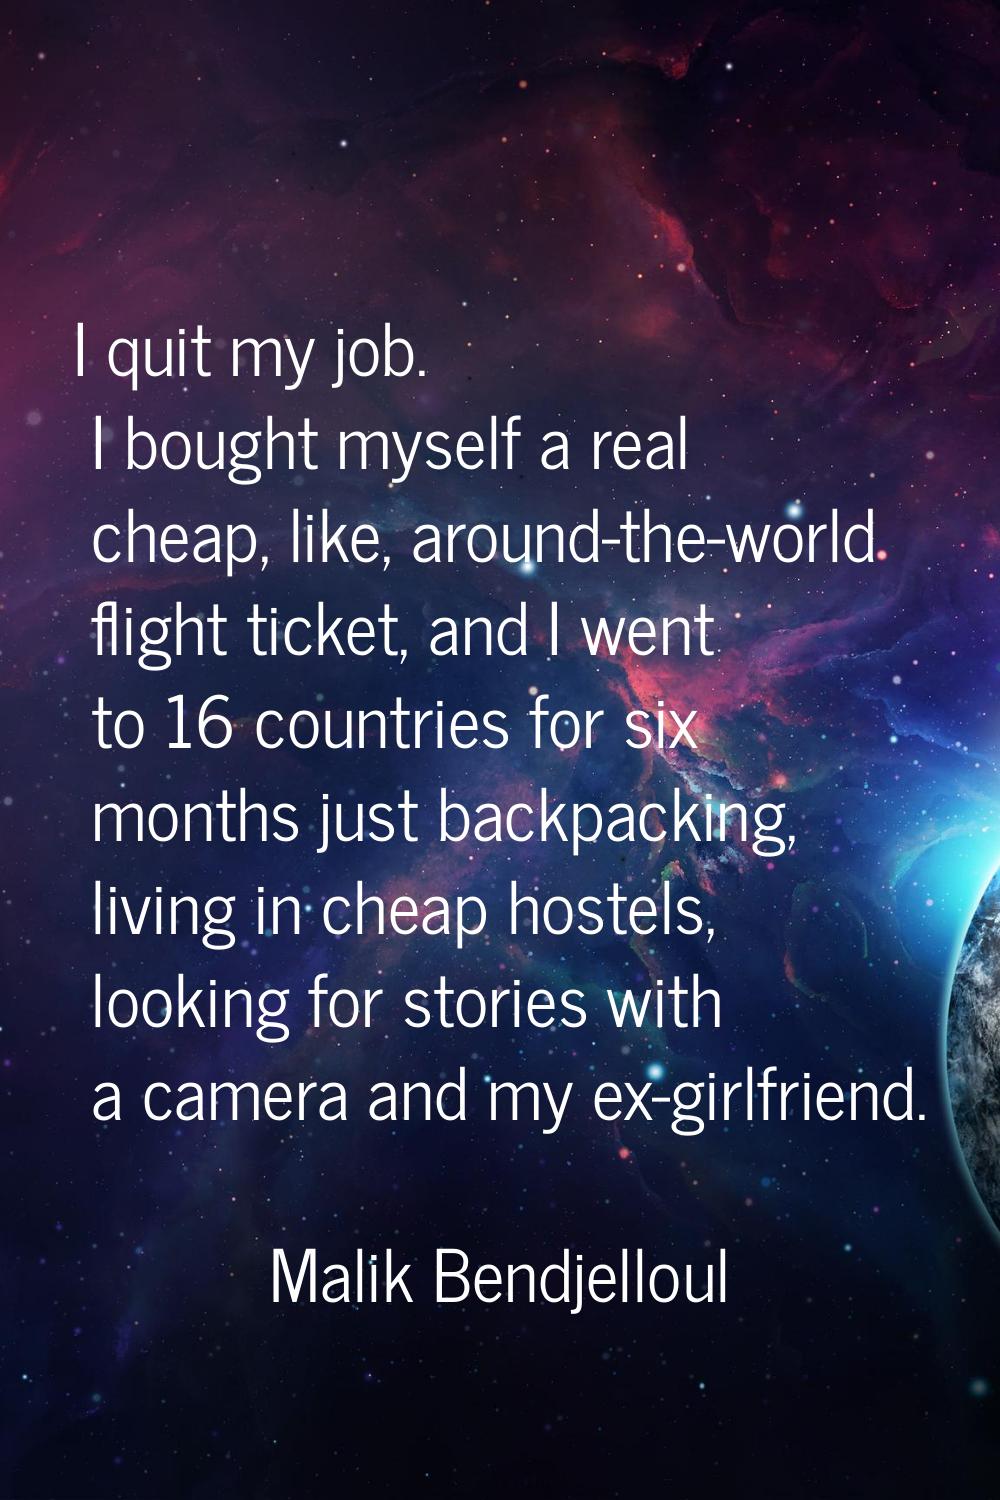 I quit my job. I bought myself a real cheap, like, around-the-world flight ticket, and I went to 16